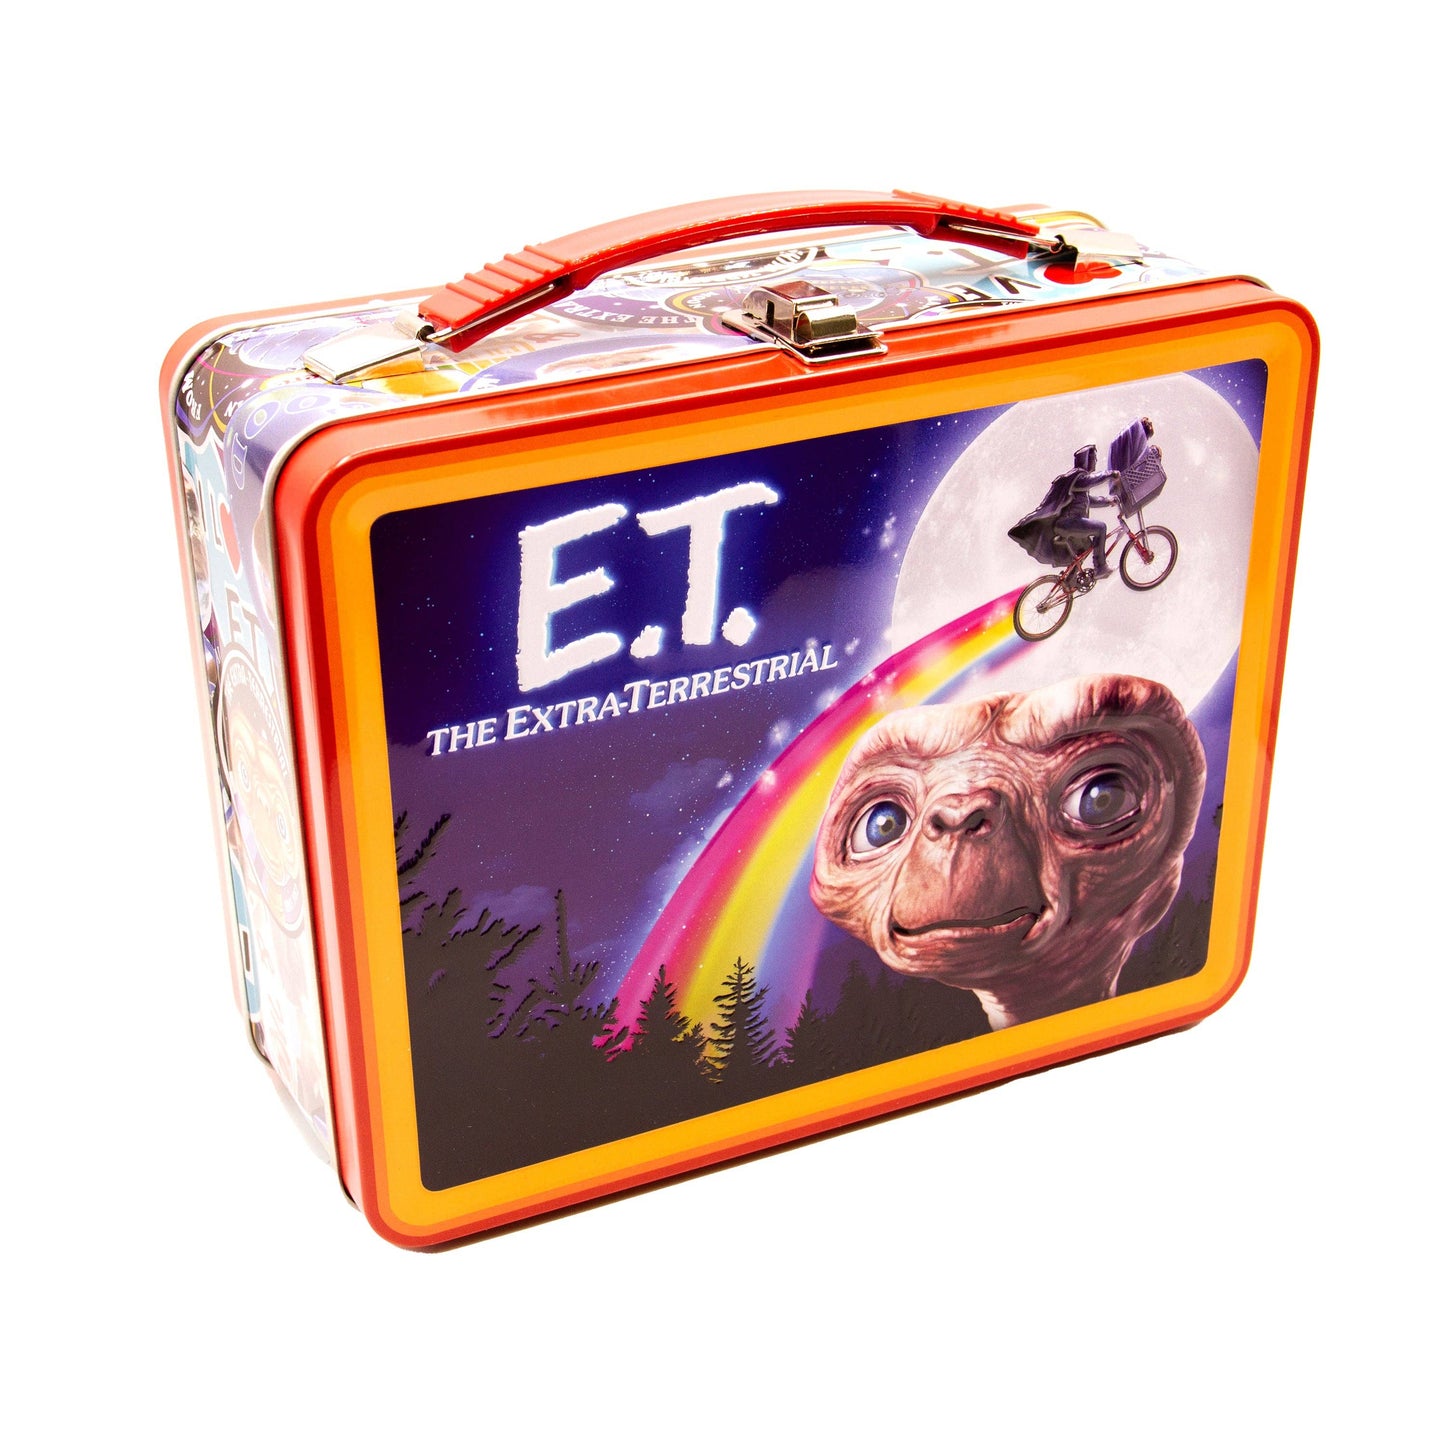 A perfect E.T. gift for all fans - young & old! Embossed art & ideal storage size. 100% officially licensed E.T. merchandise. Great for storing merch, toys, cards & more.